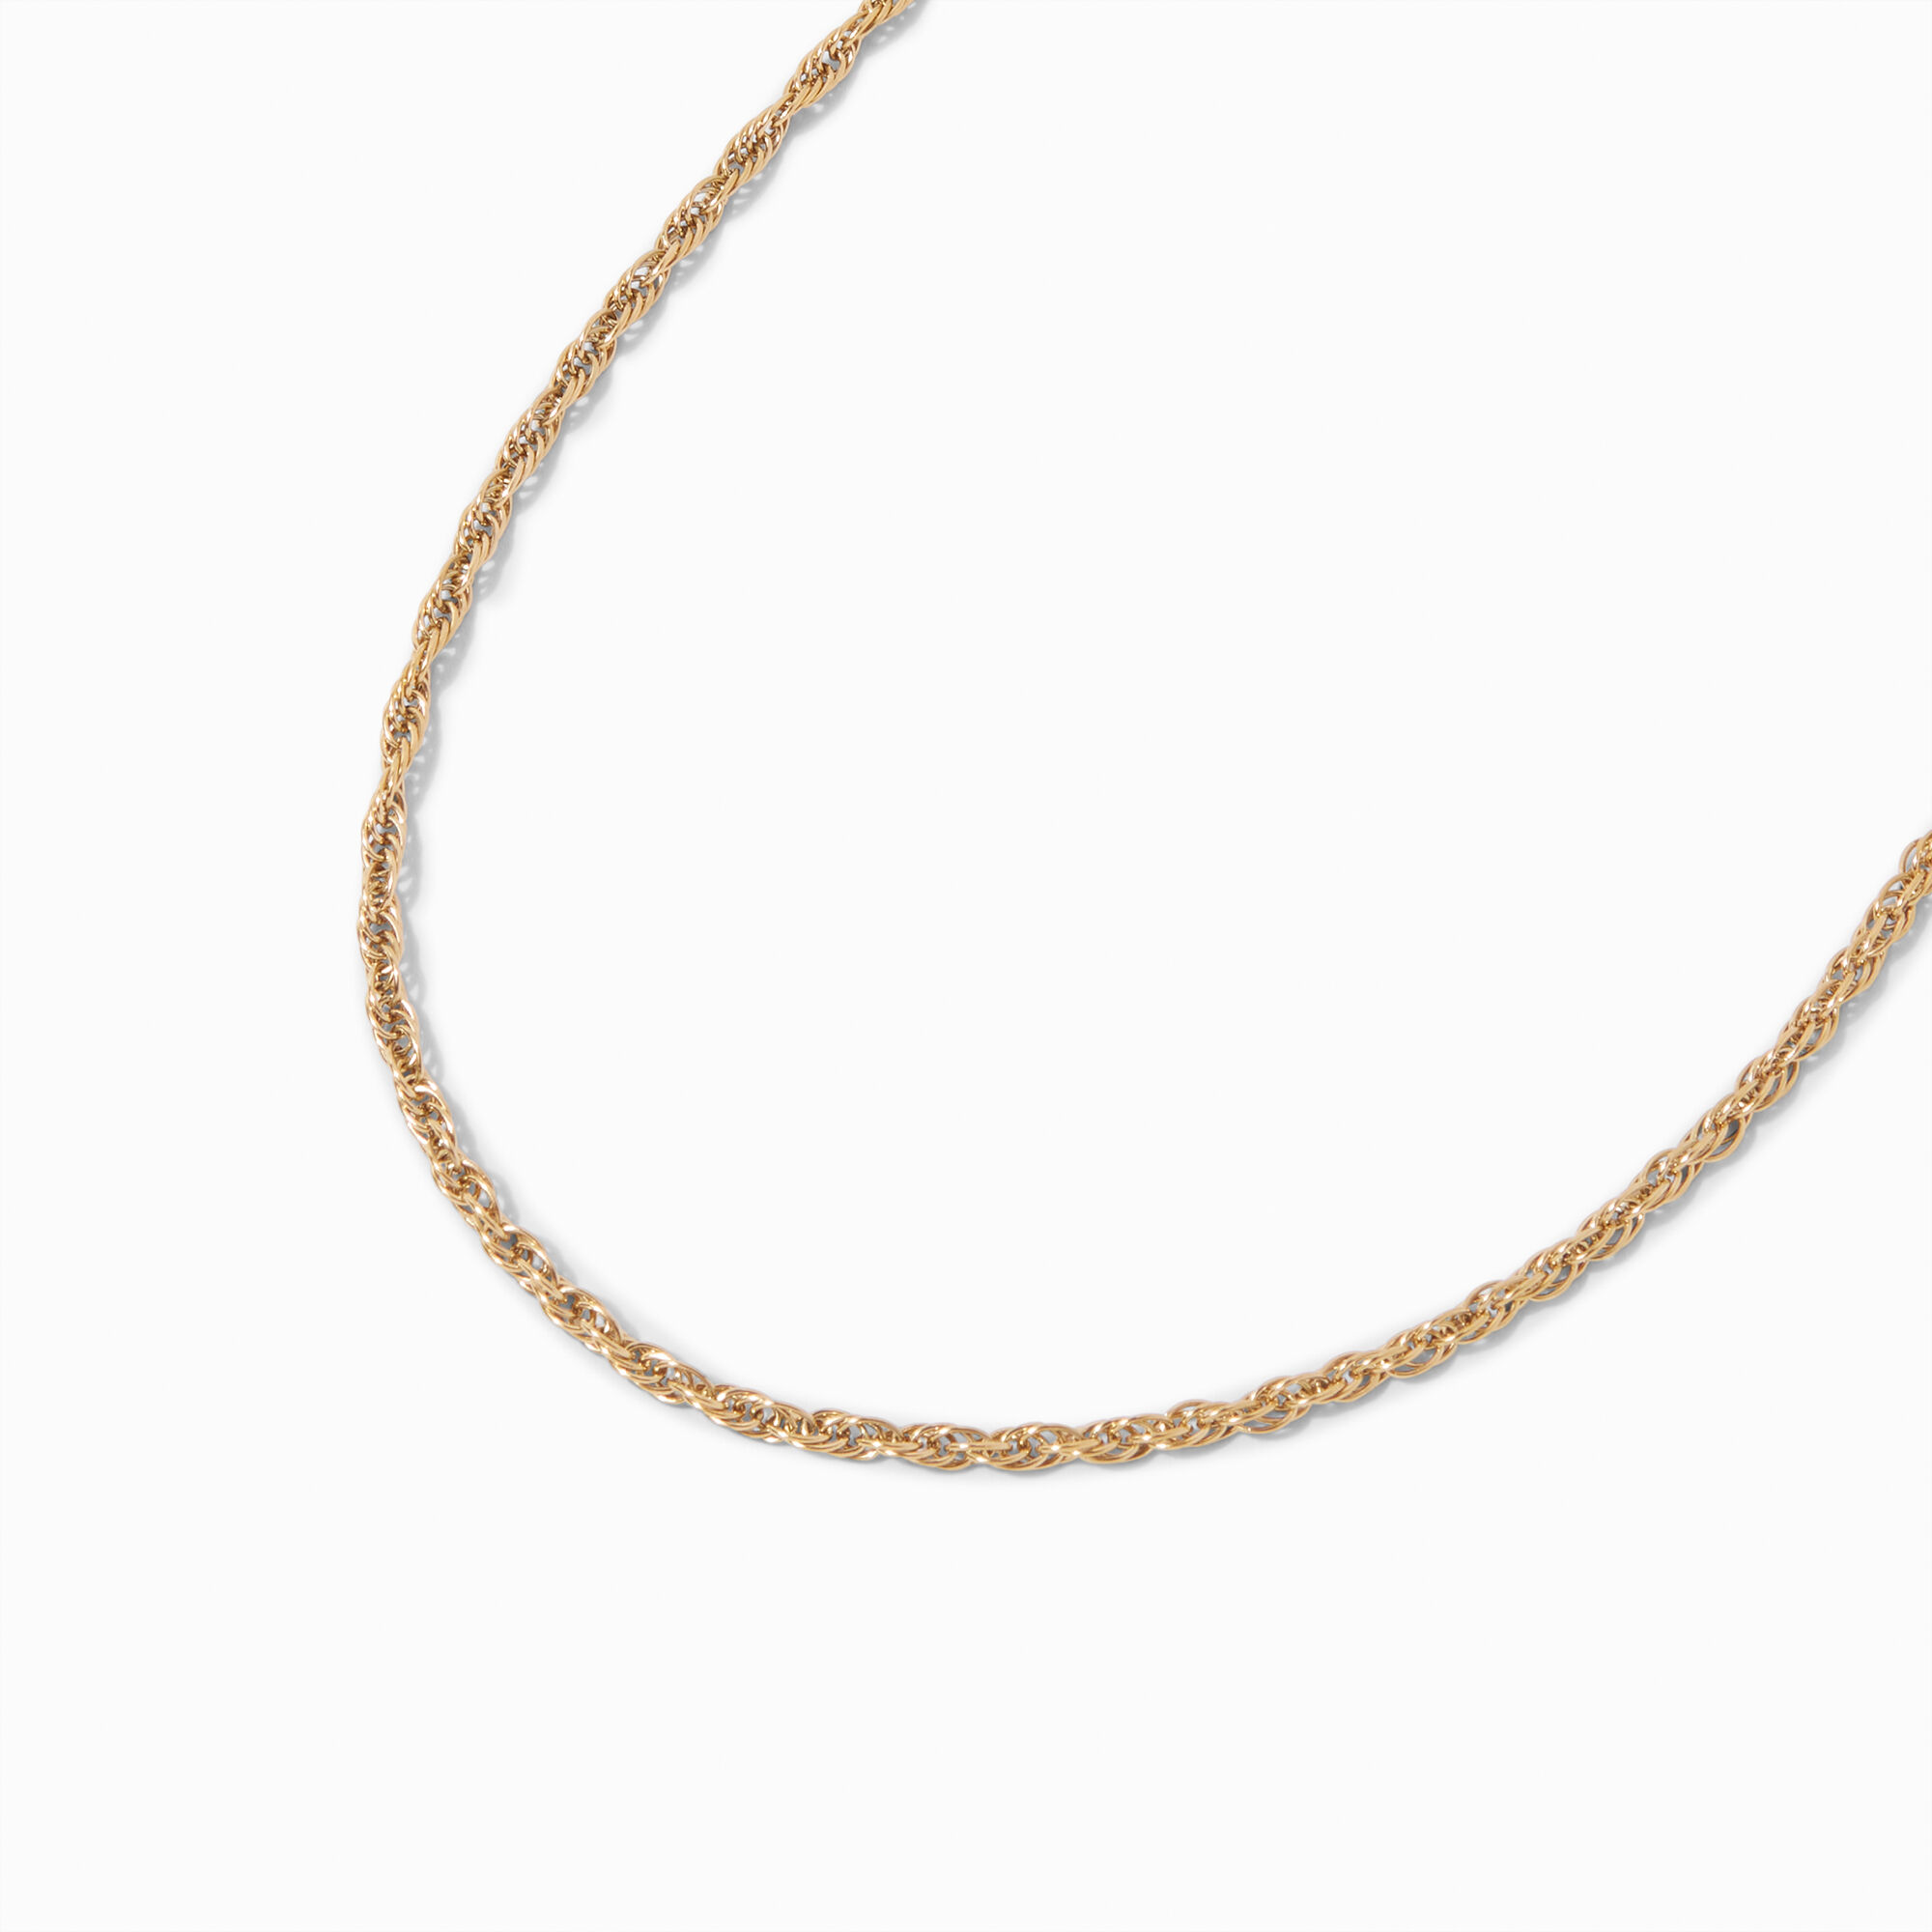 View Claires Tone Stainless Steel ThreeRope Braided Chain Necklace Gold information